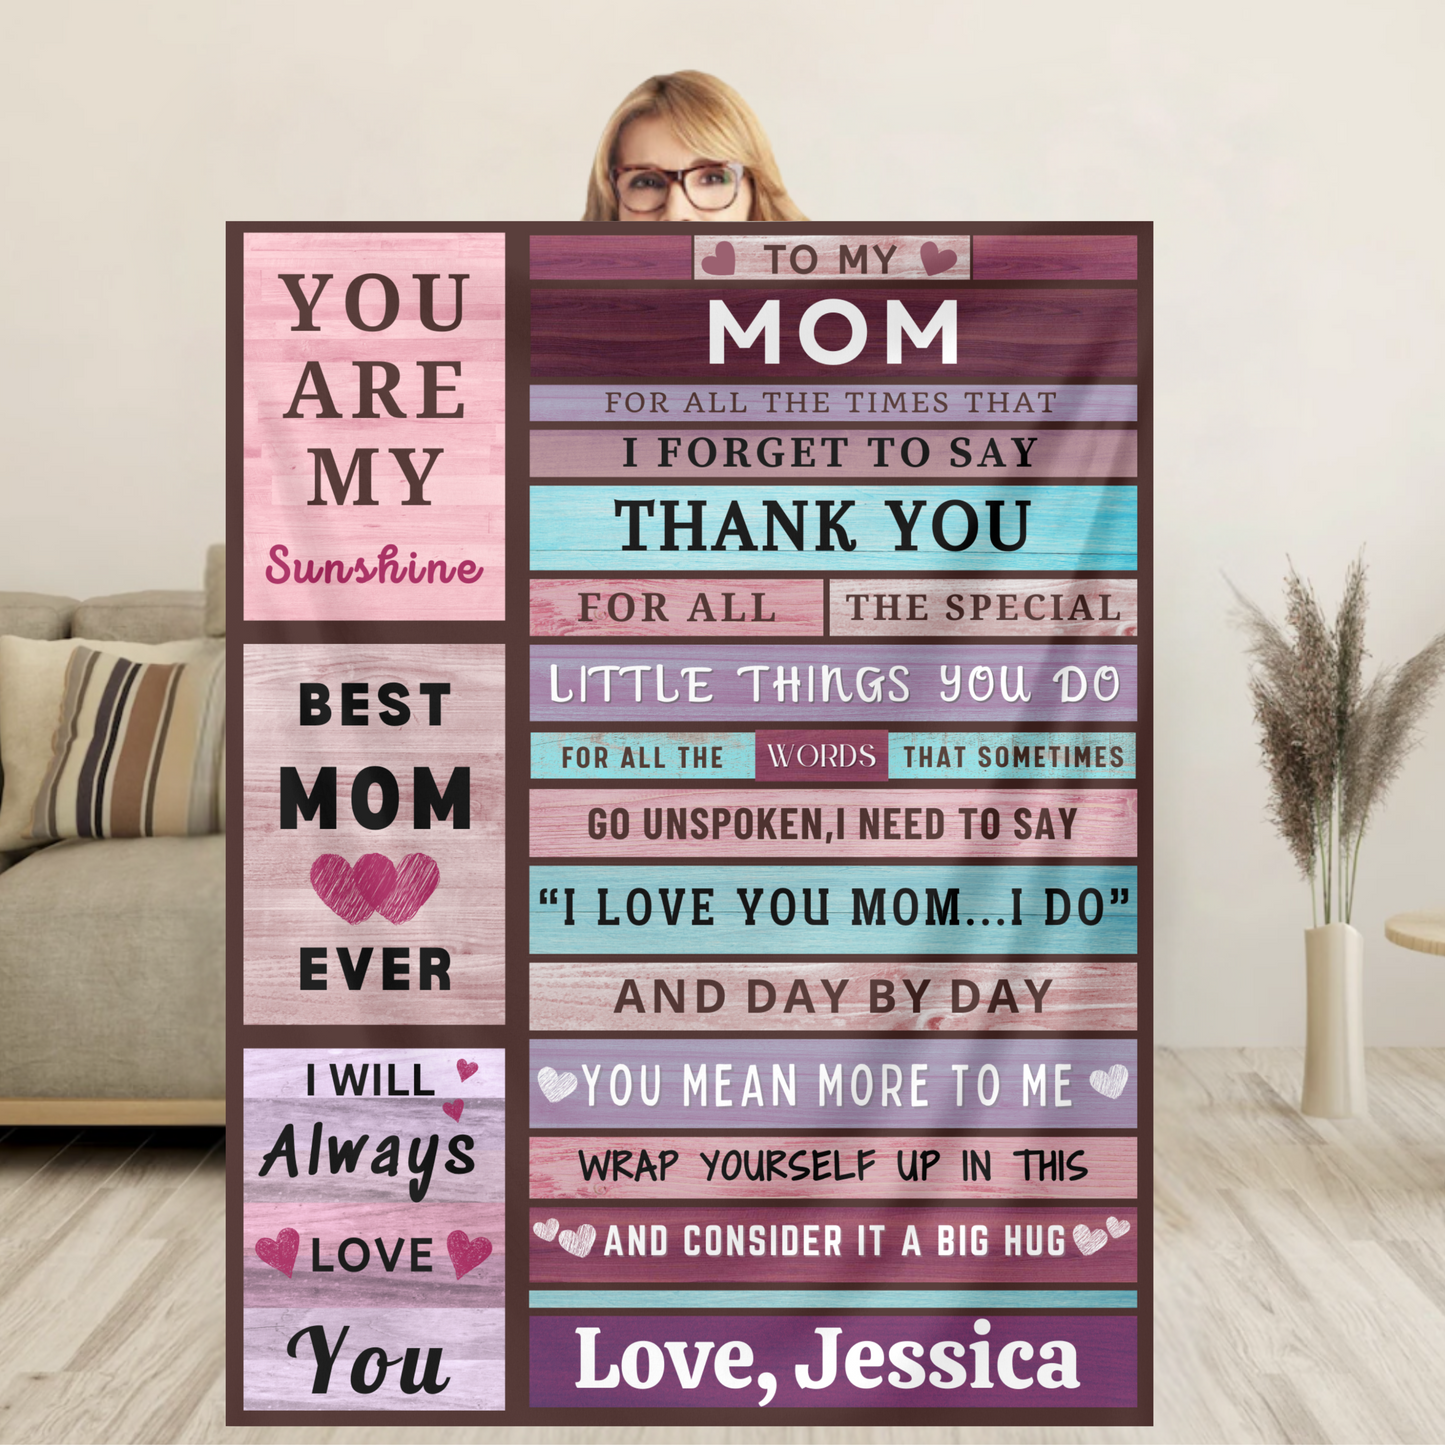 Mom Blanket | Personalized